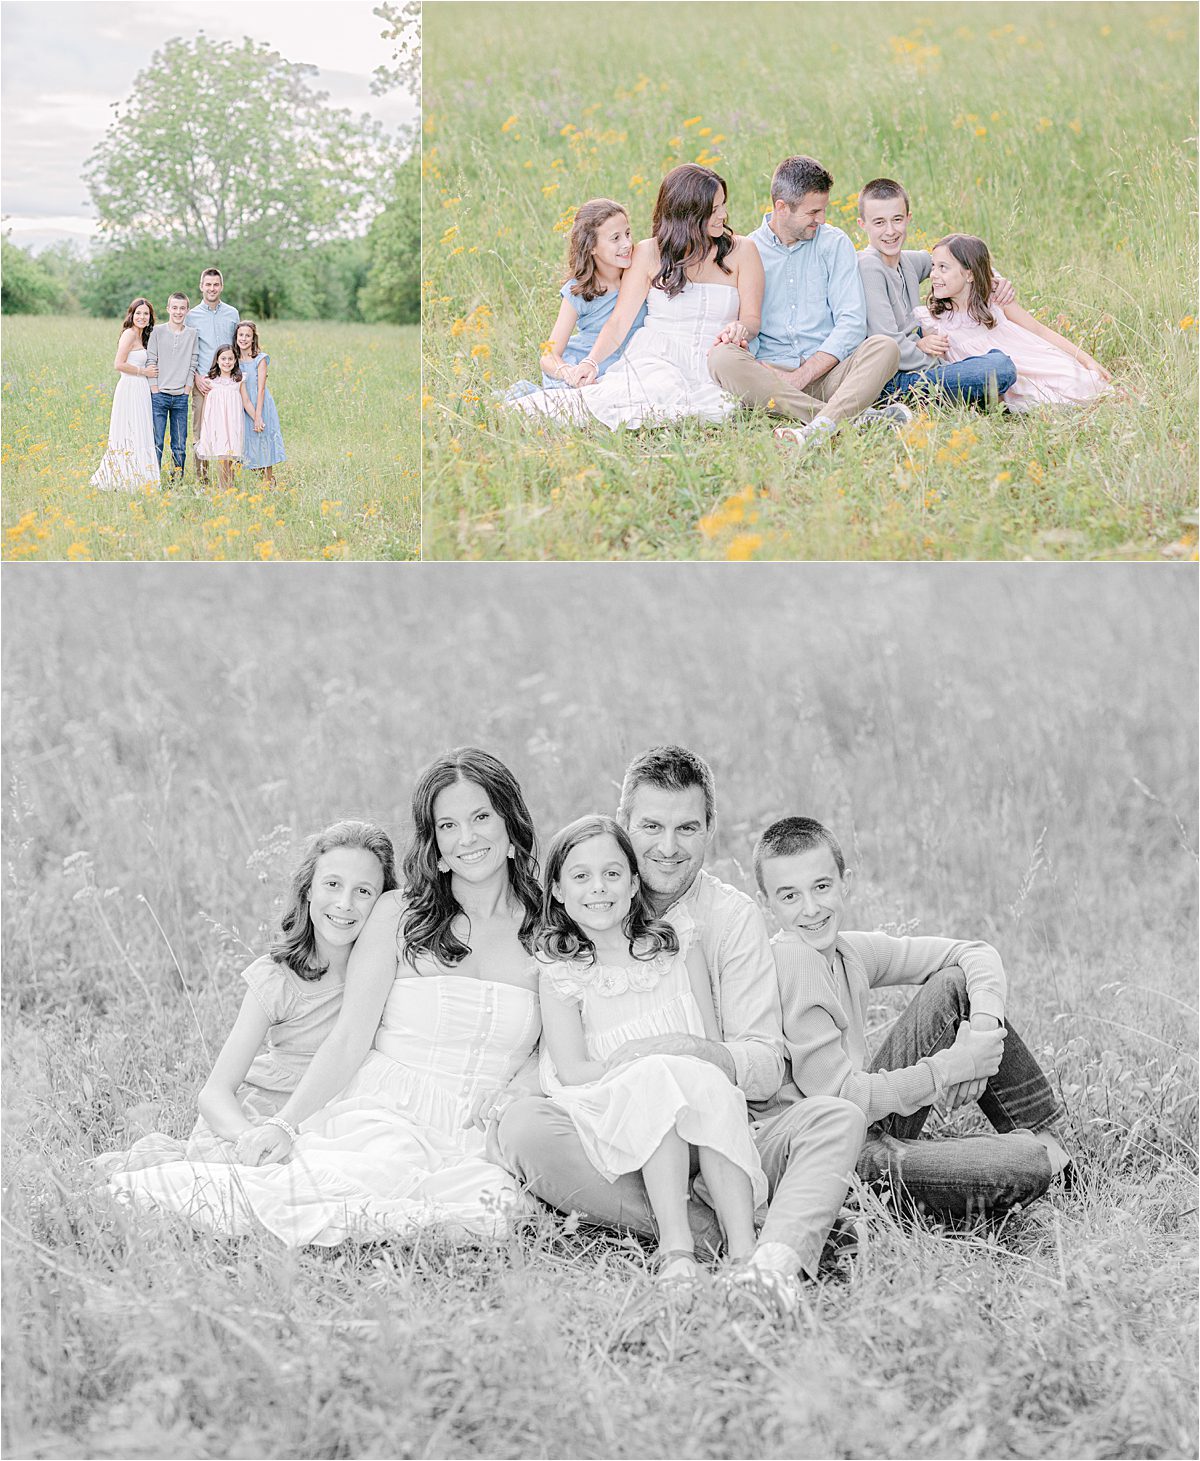 Photos of a family in a Spring field of wild flowers in Watkinsville, GA.